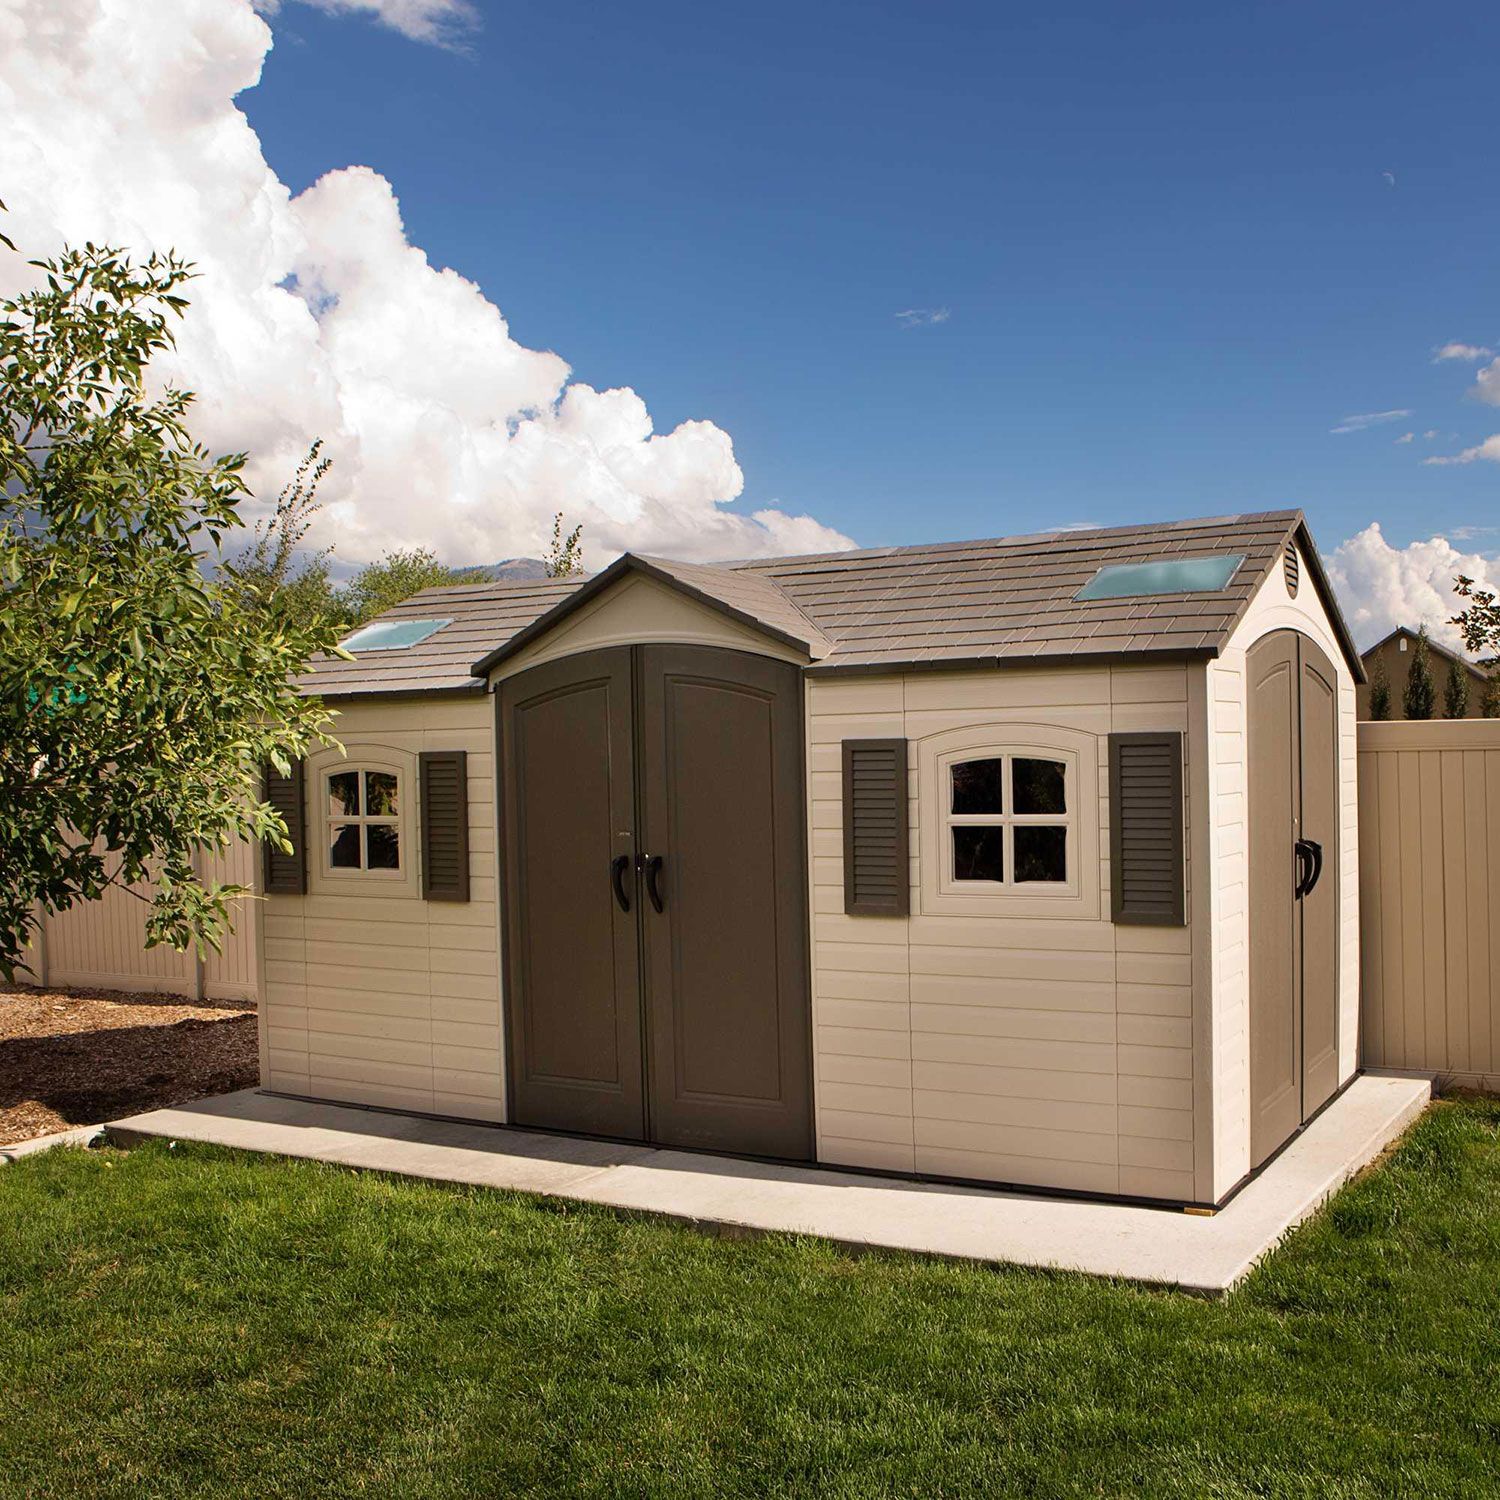 ... impossible? A decent maintenance free Vinyl shed for under $1,000